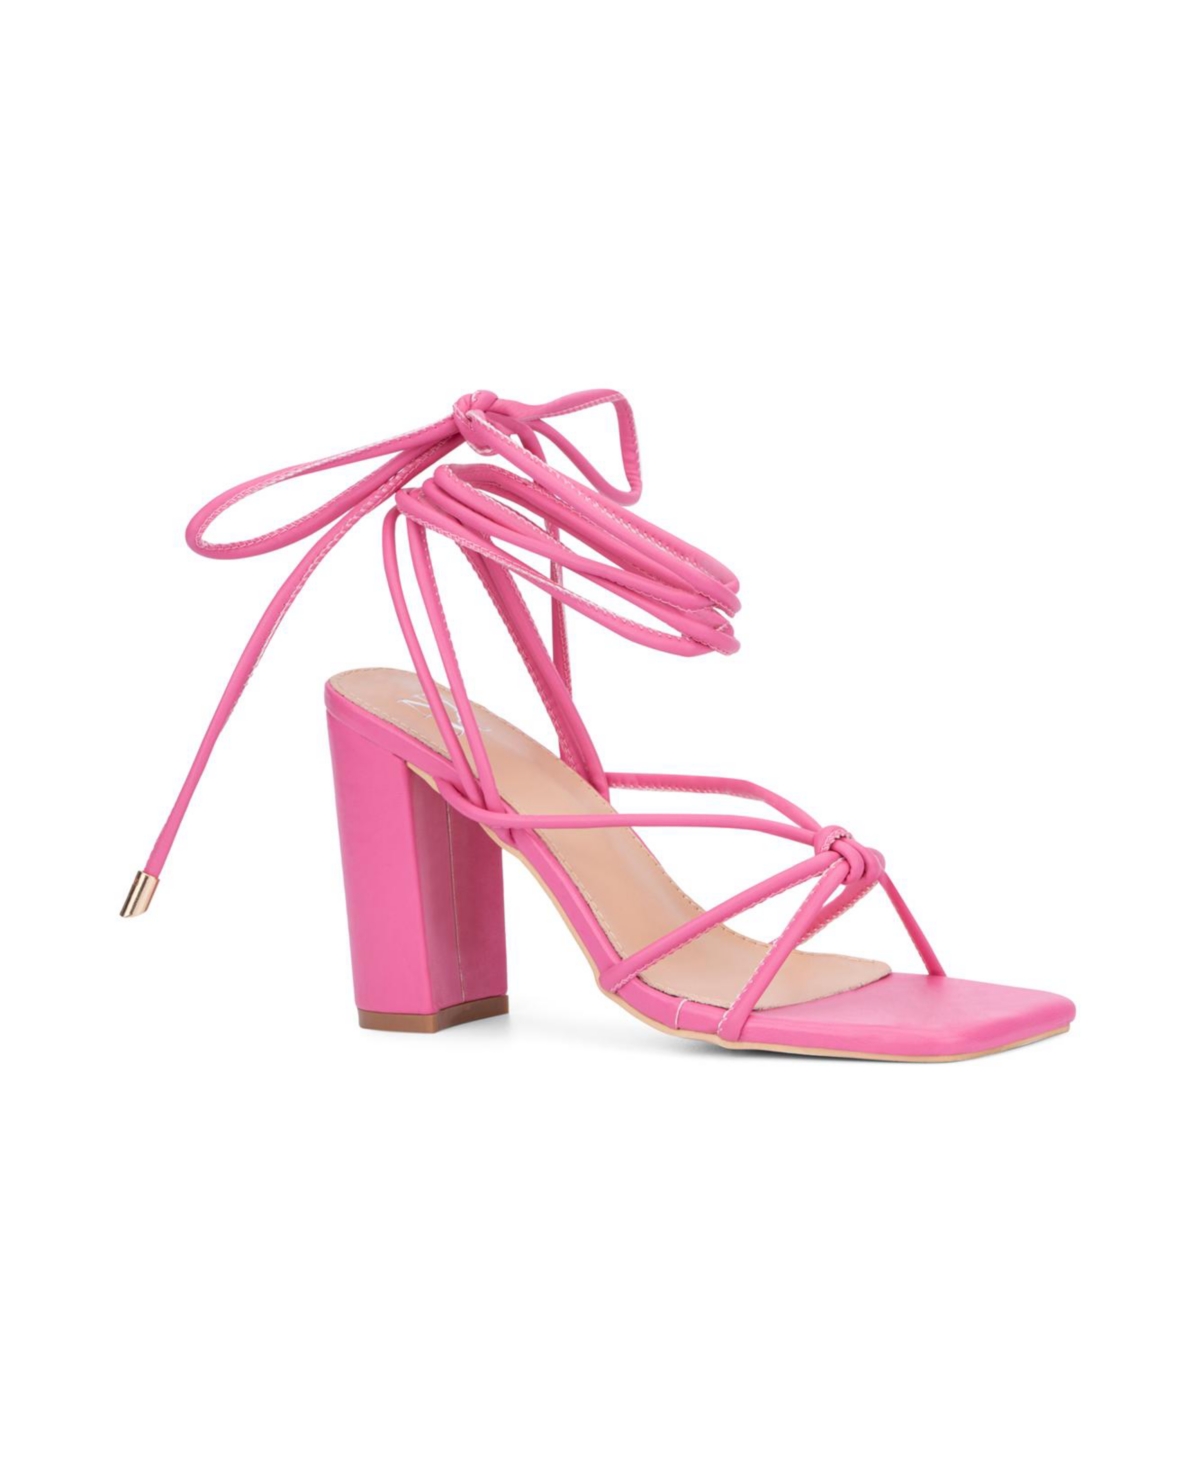 NEW YORK AND COMPANY WOMEN'S DENA LACE UP HEELED SANDAL